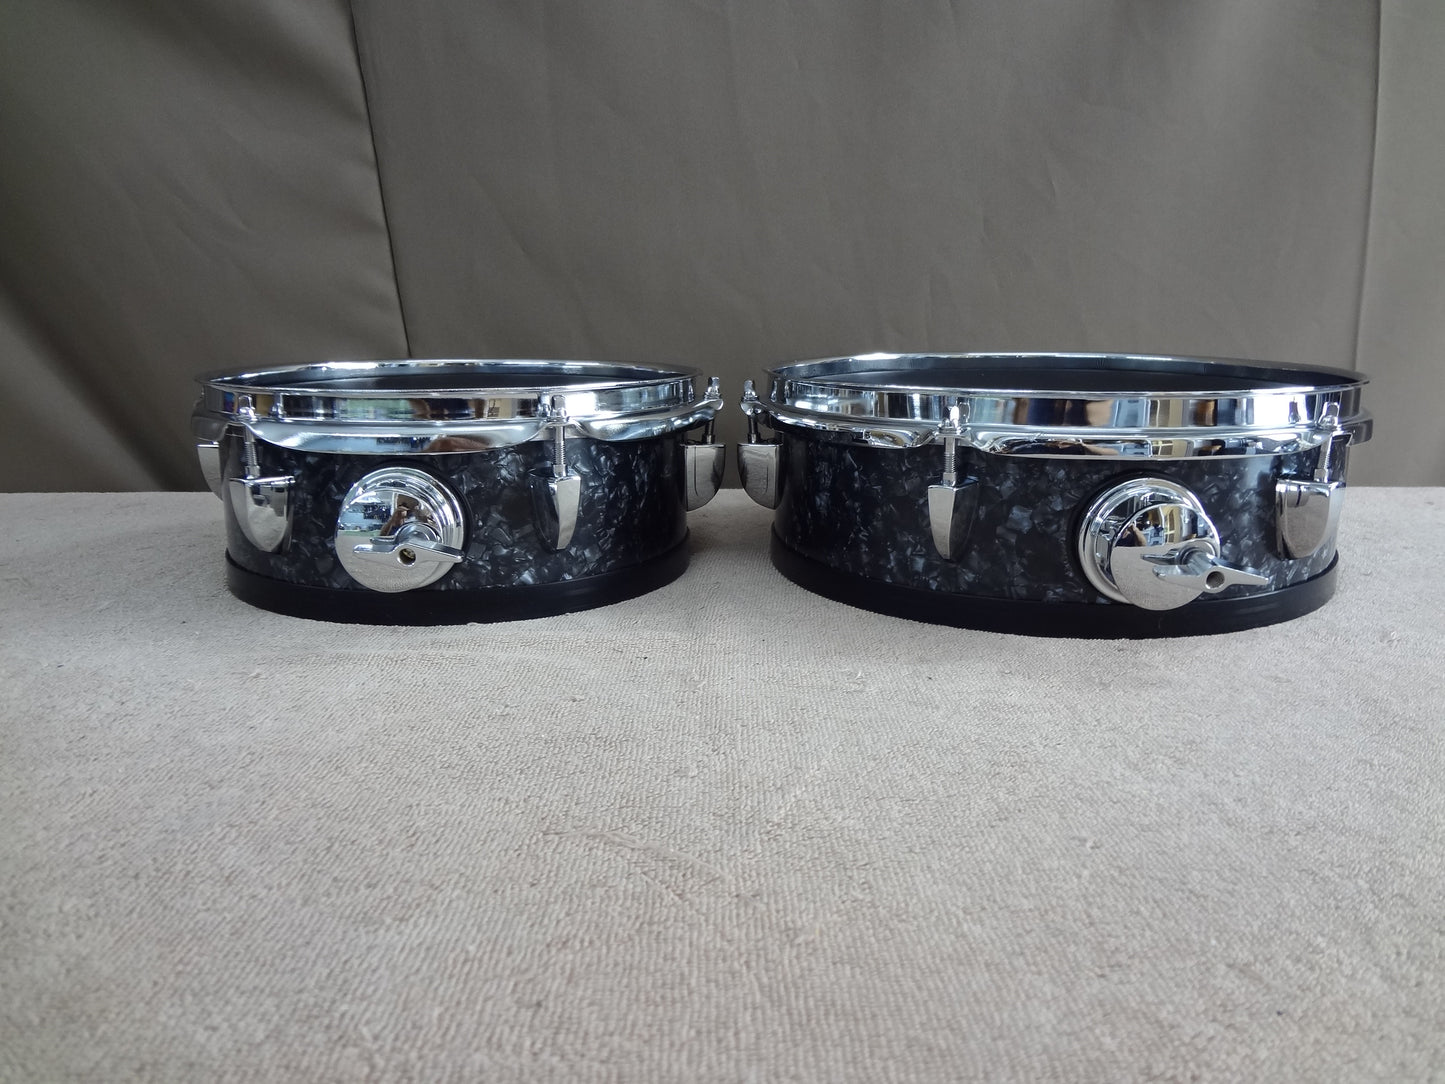 NEW 4 PIECE CUSTOM ELECTRONIC DRUM SHELL PACK - BLACK PEARL